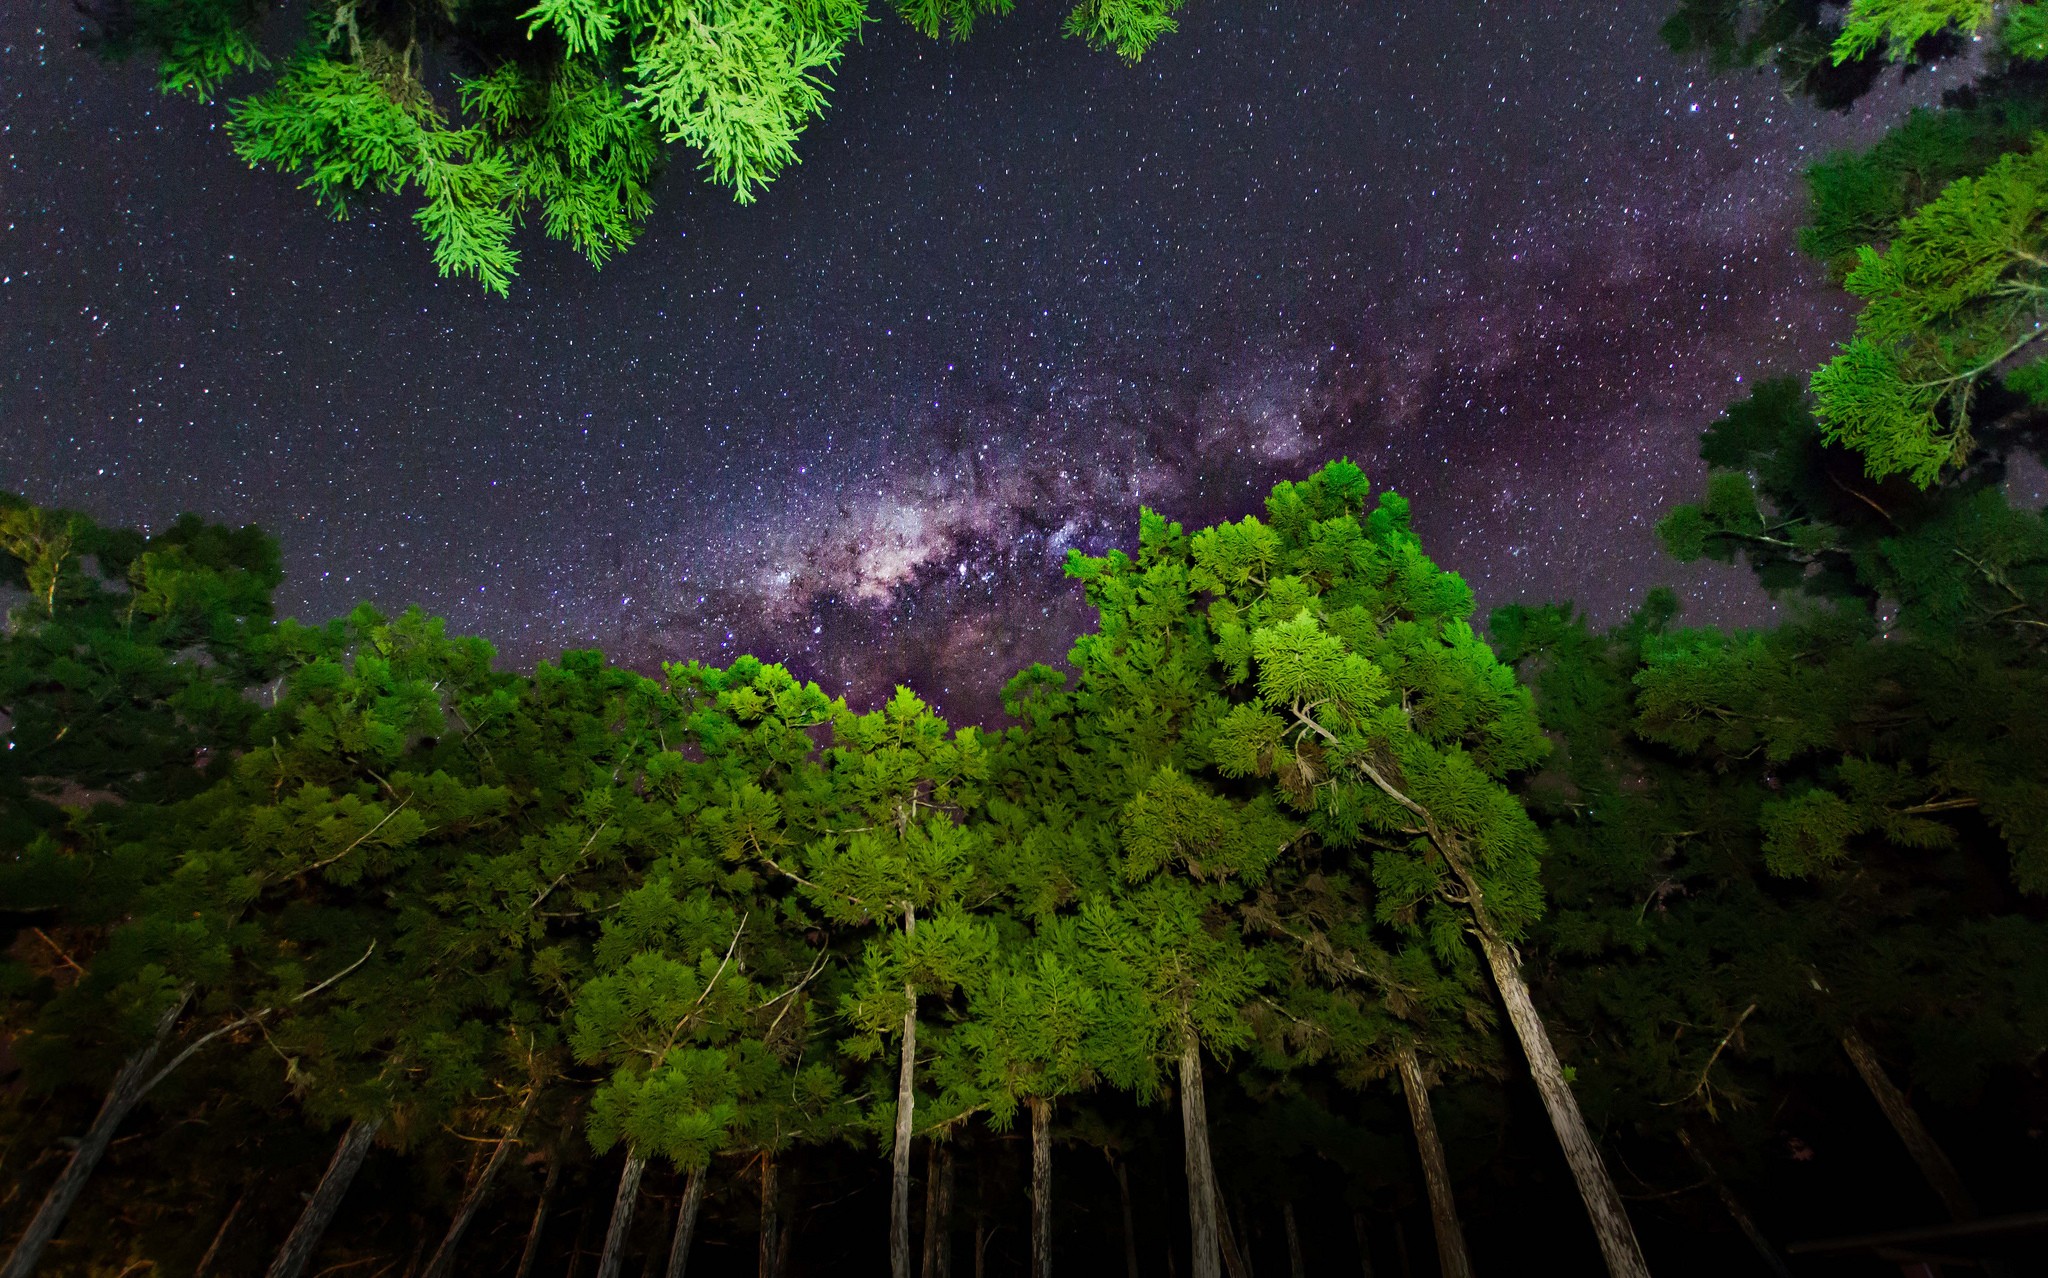 General 2048x1278 star trails plants trees nature forest looking up sky stars outdoors